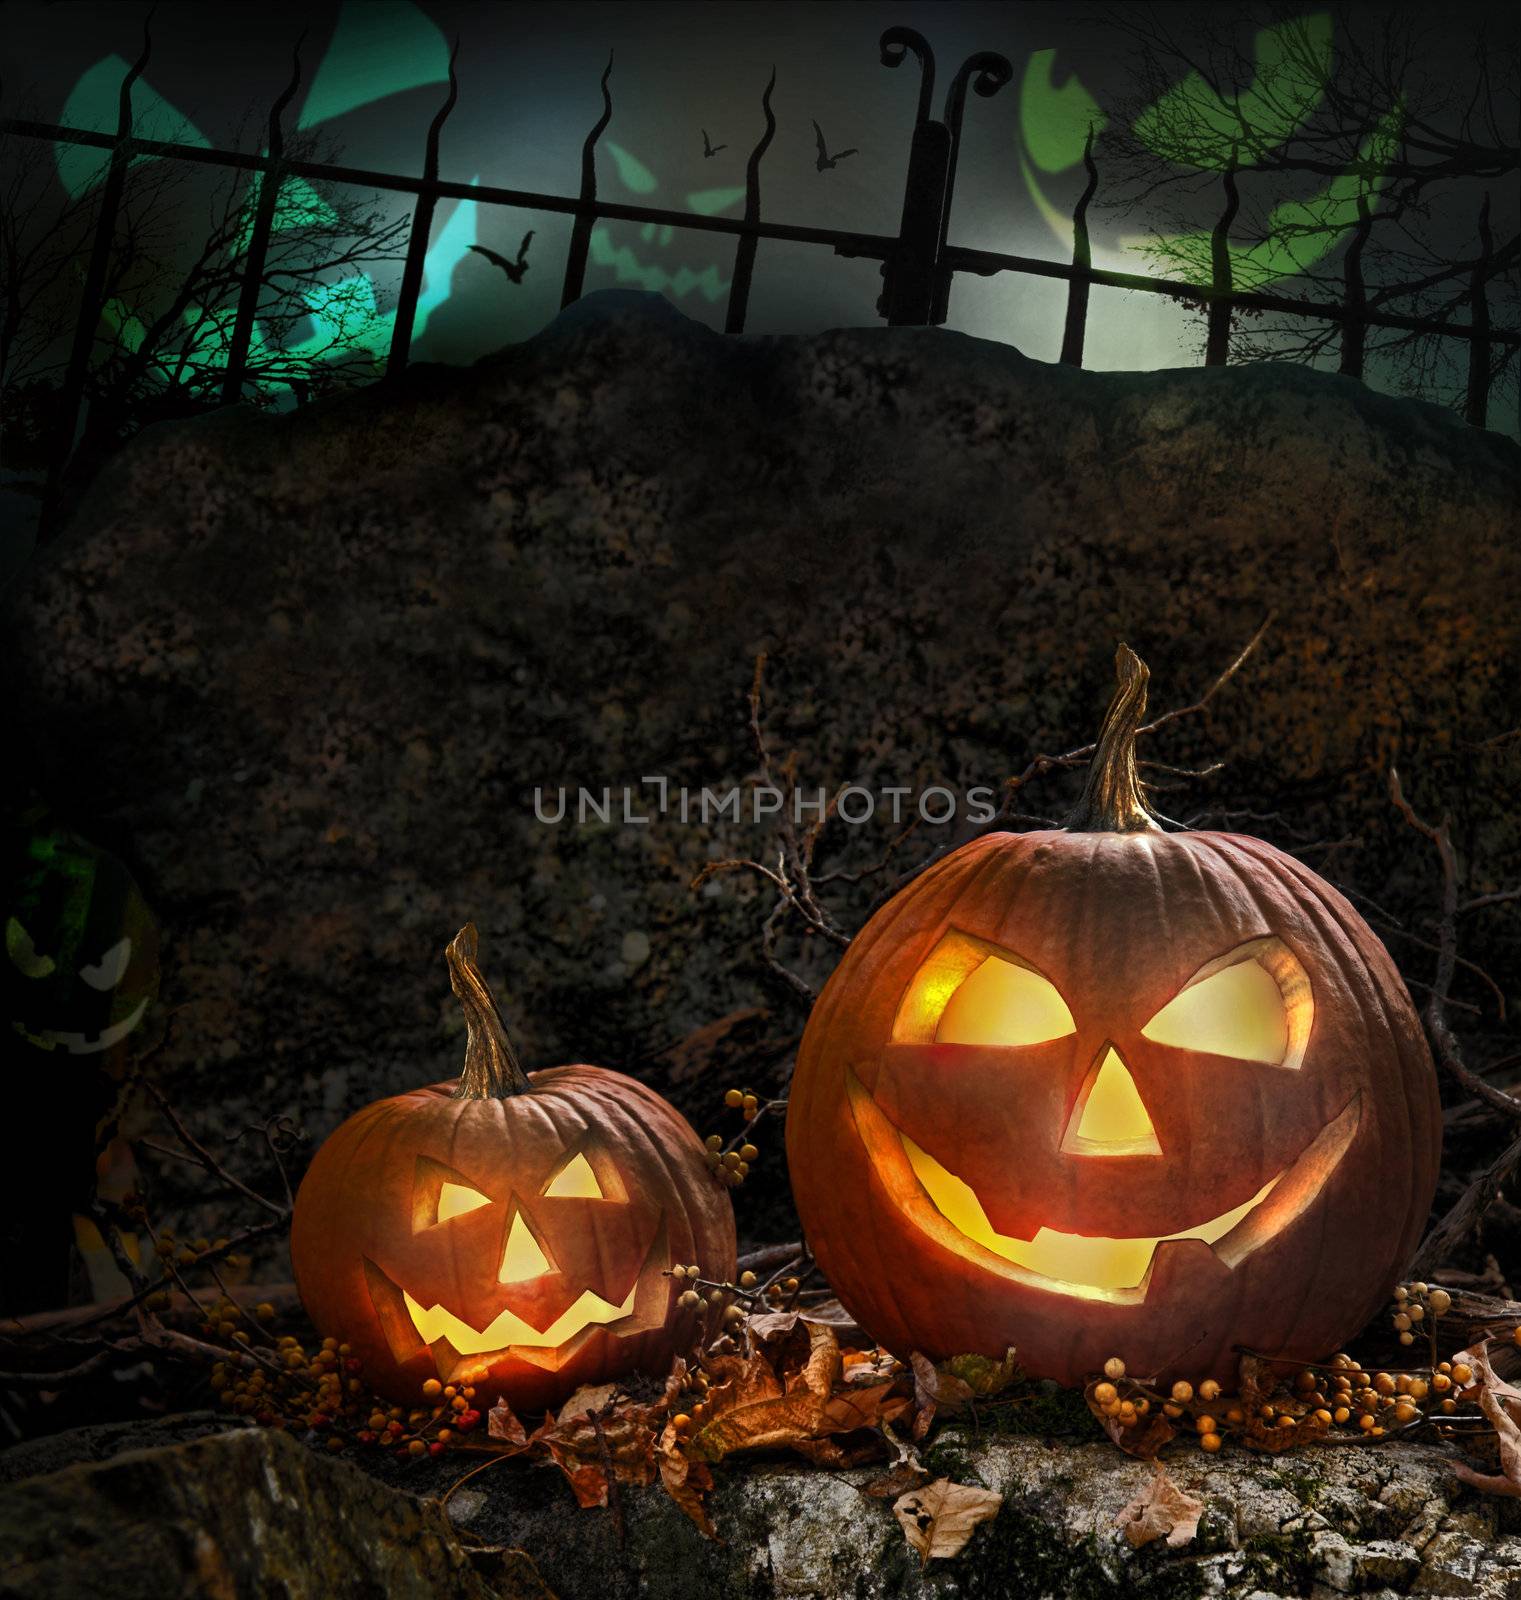 Halloween pumpkins on rocks in a forest at night